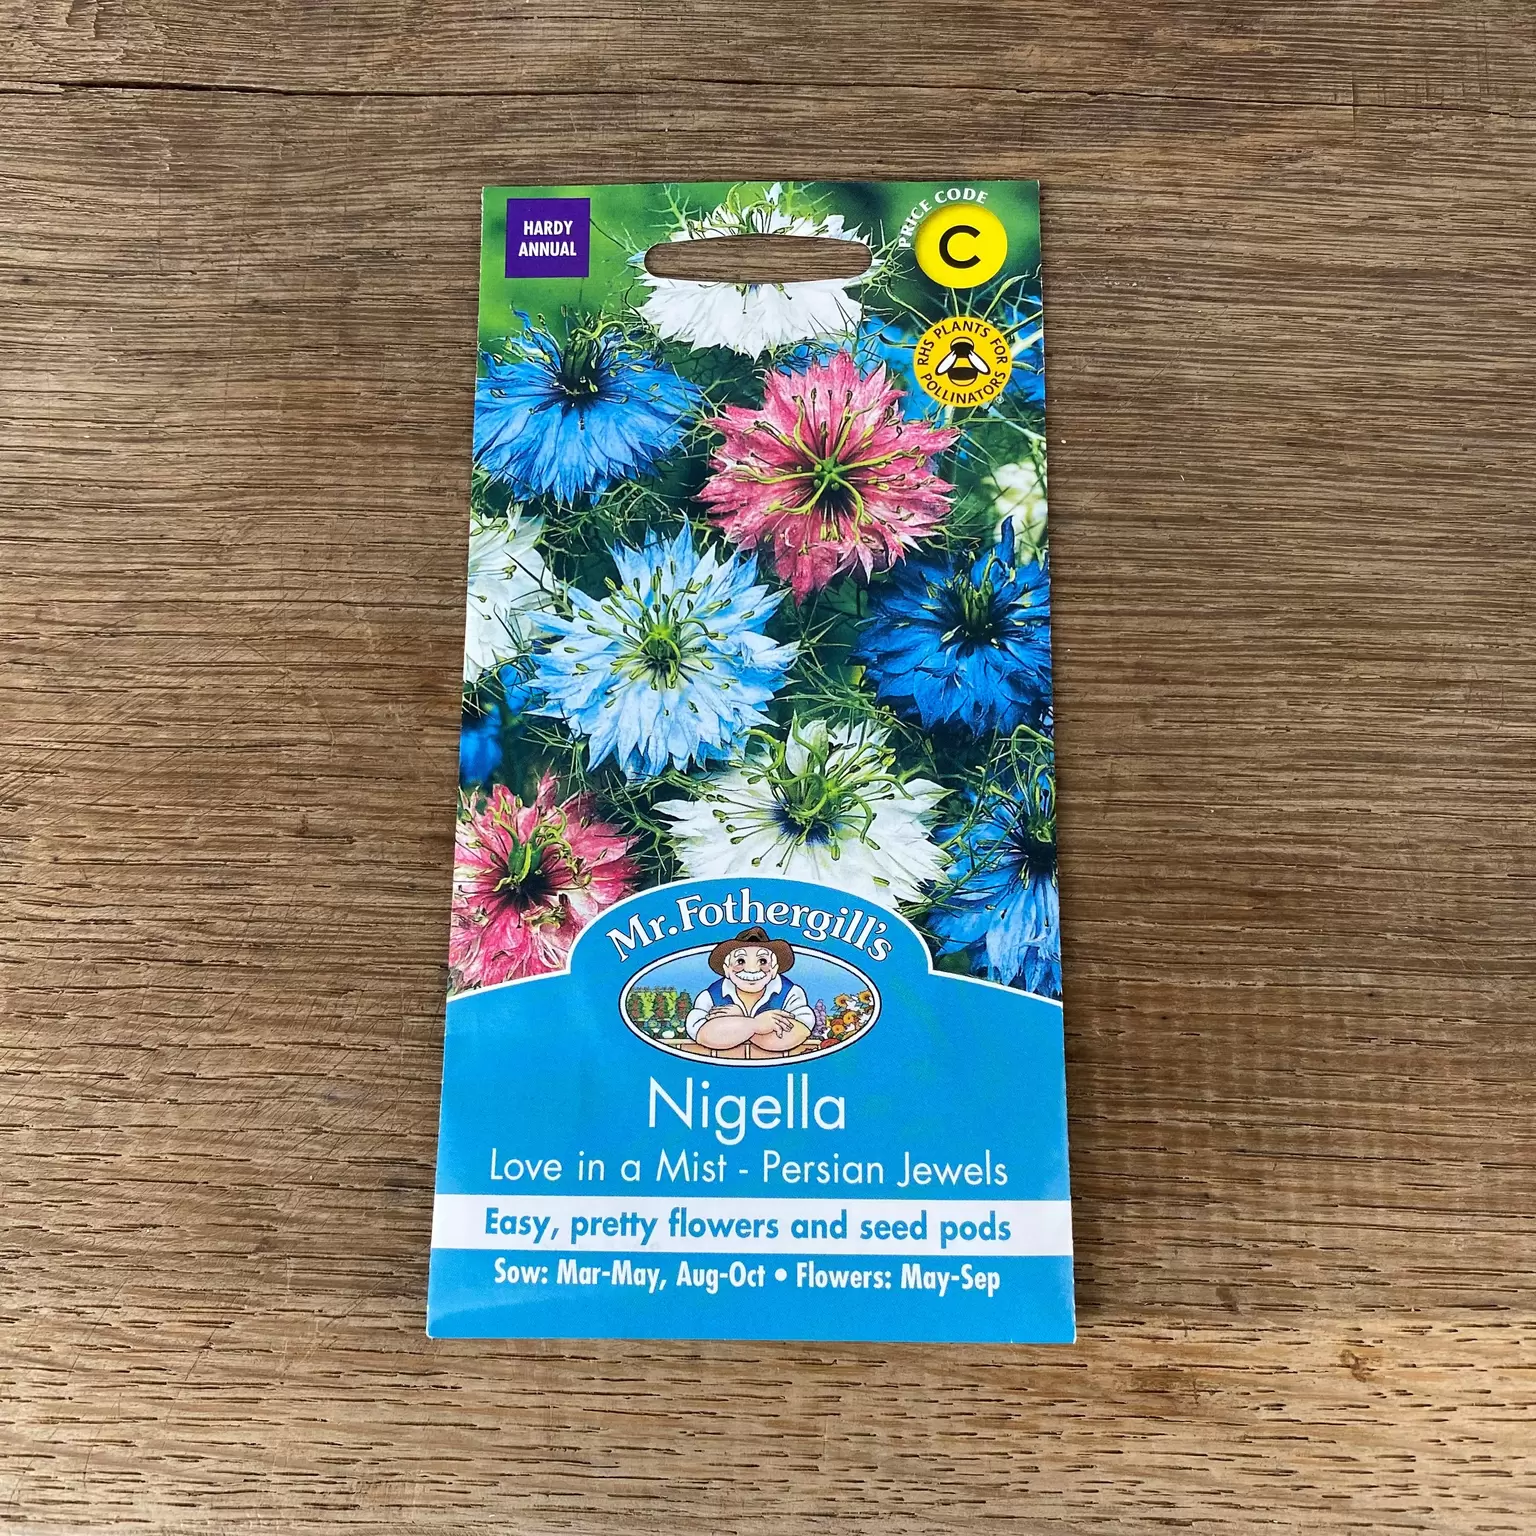 Flower Seeds - Nigella Love in a Mist - Perian Jewels from Boma Garden Centre